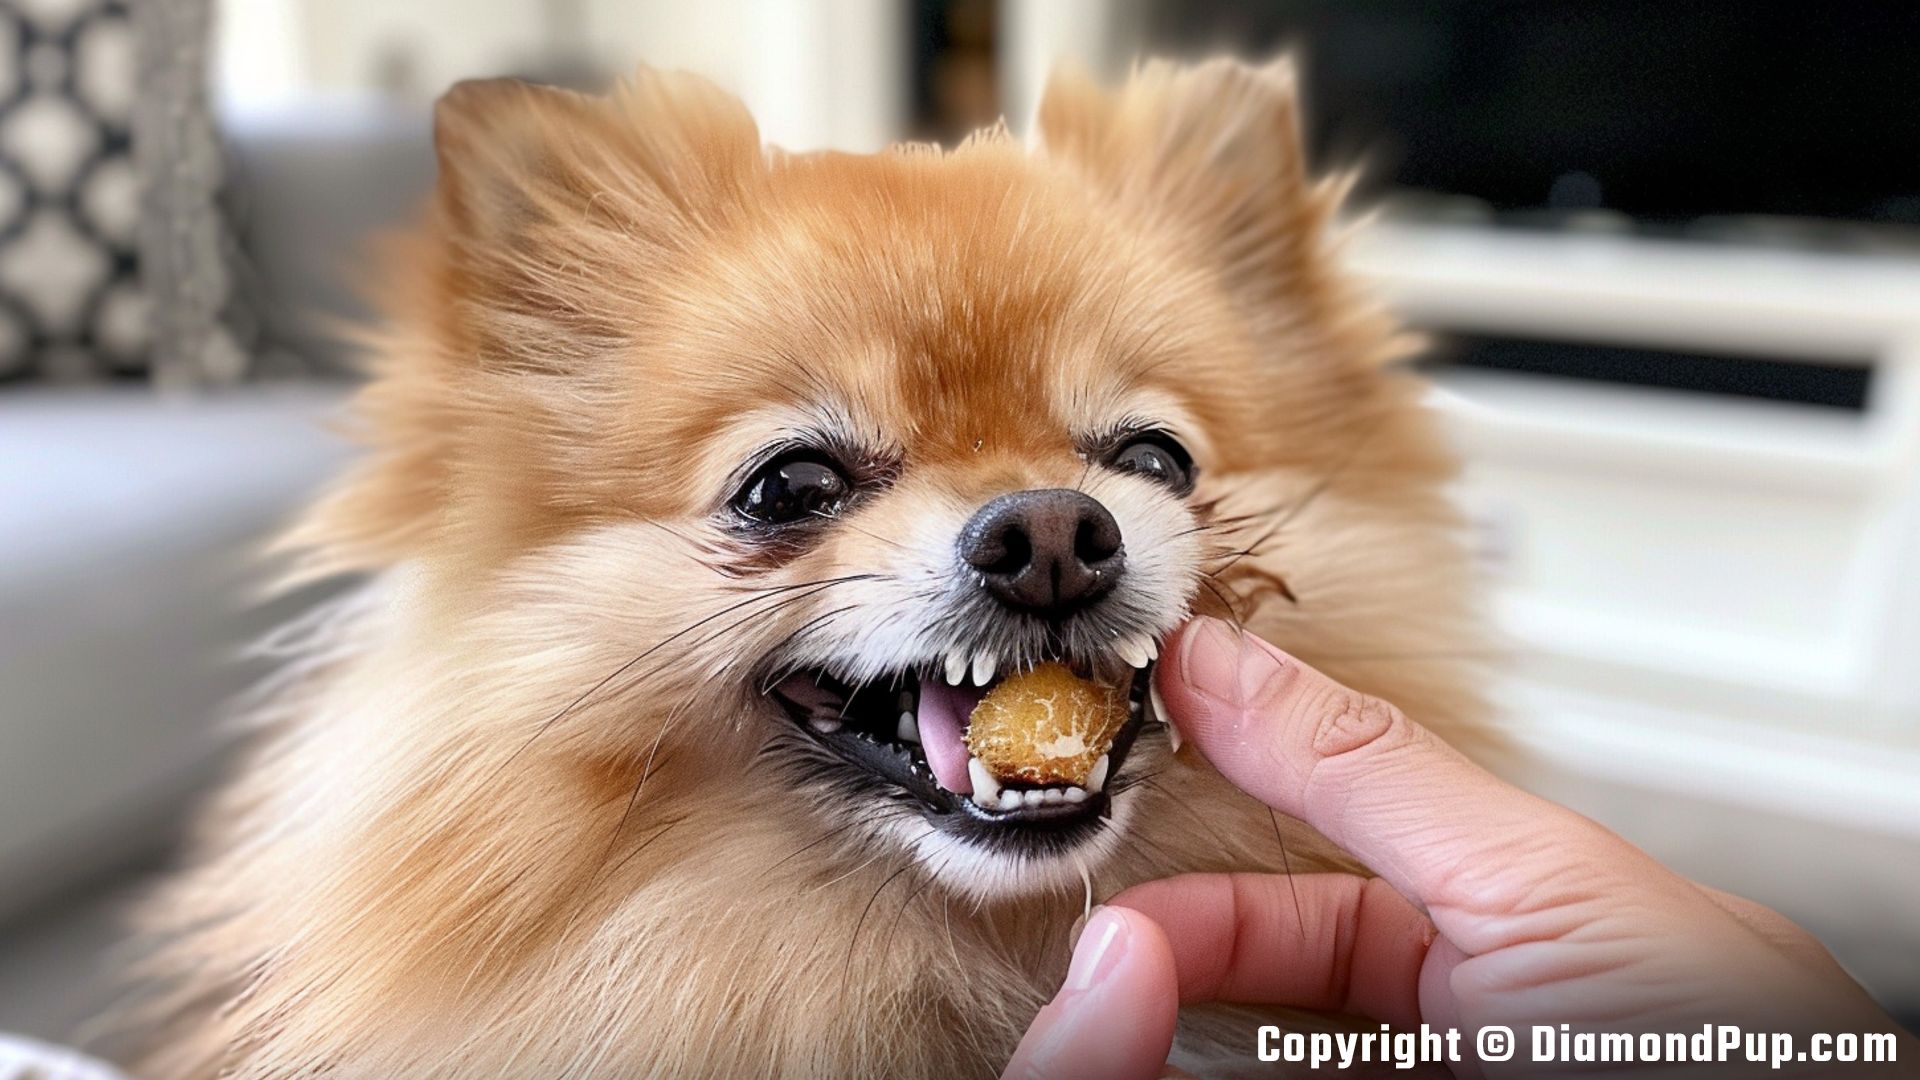 Photograph of an Adorable Pomeranian Snacking on Peaches